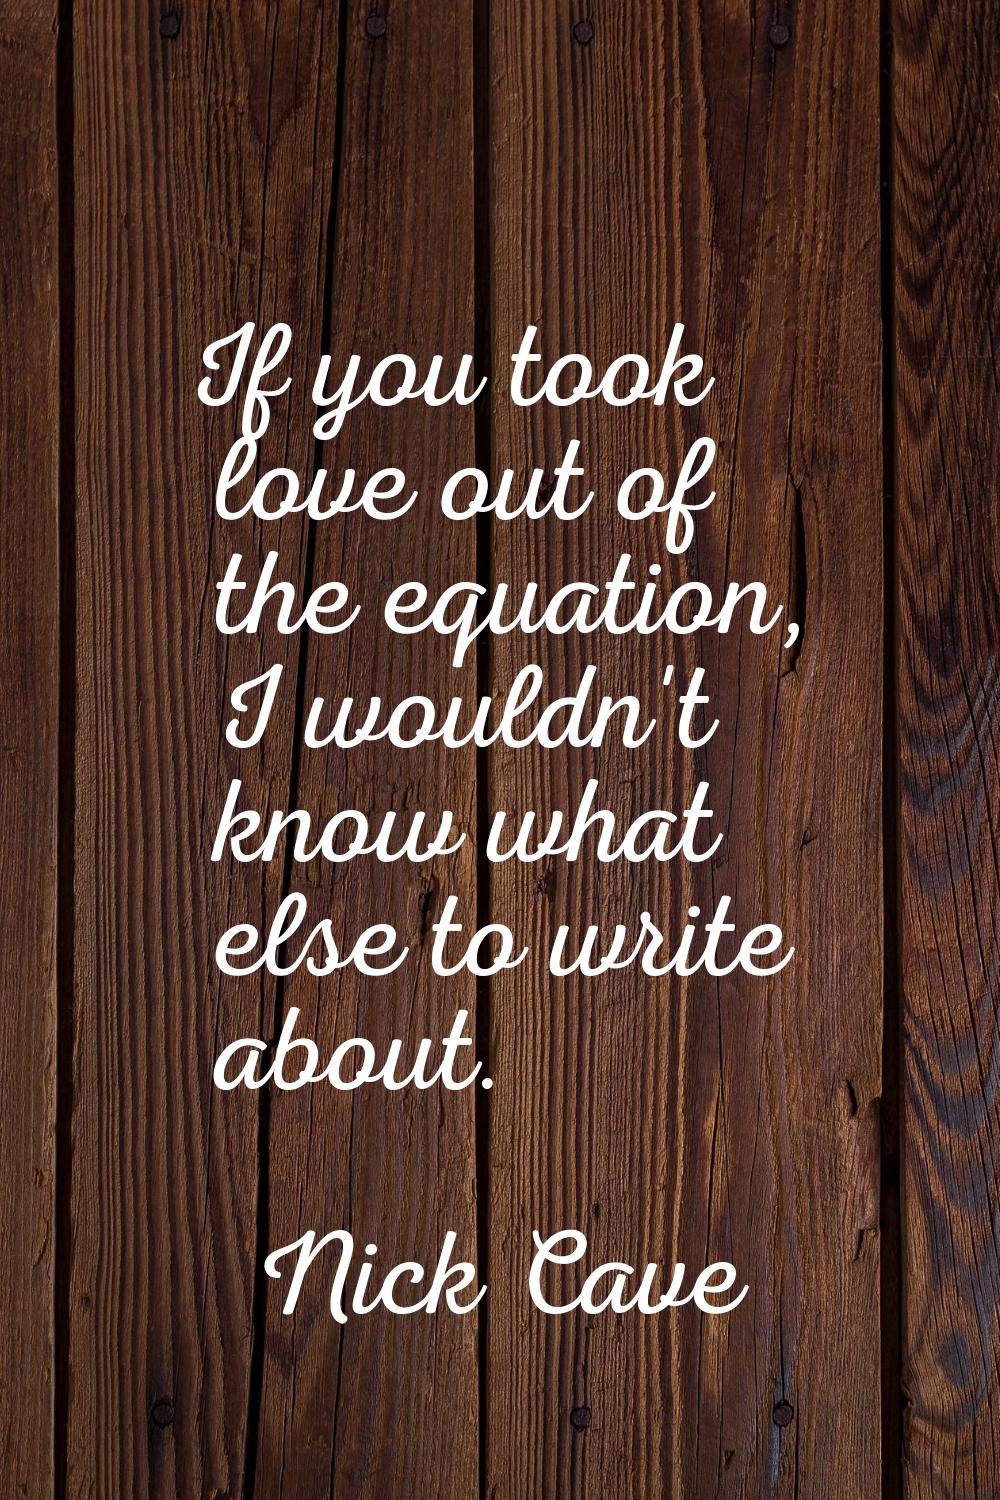 If you took love out of the equation, I wouldn't know what else to write about.